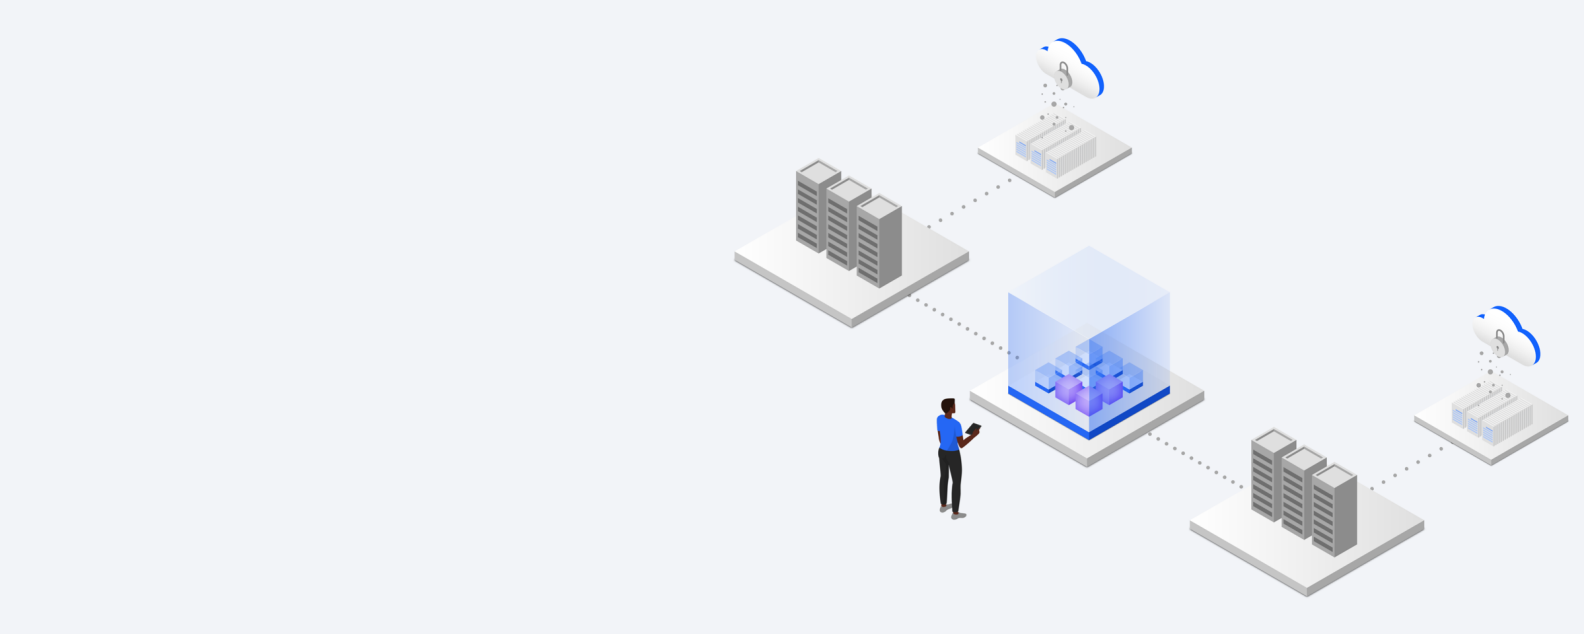 Isometric illustration showing a person accessing a storage system for data and artificial intelligence